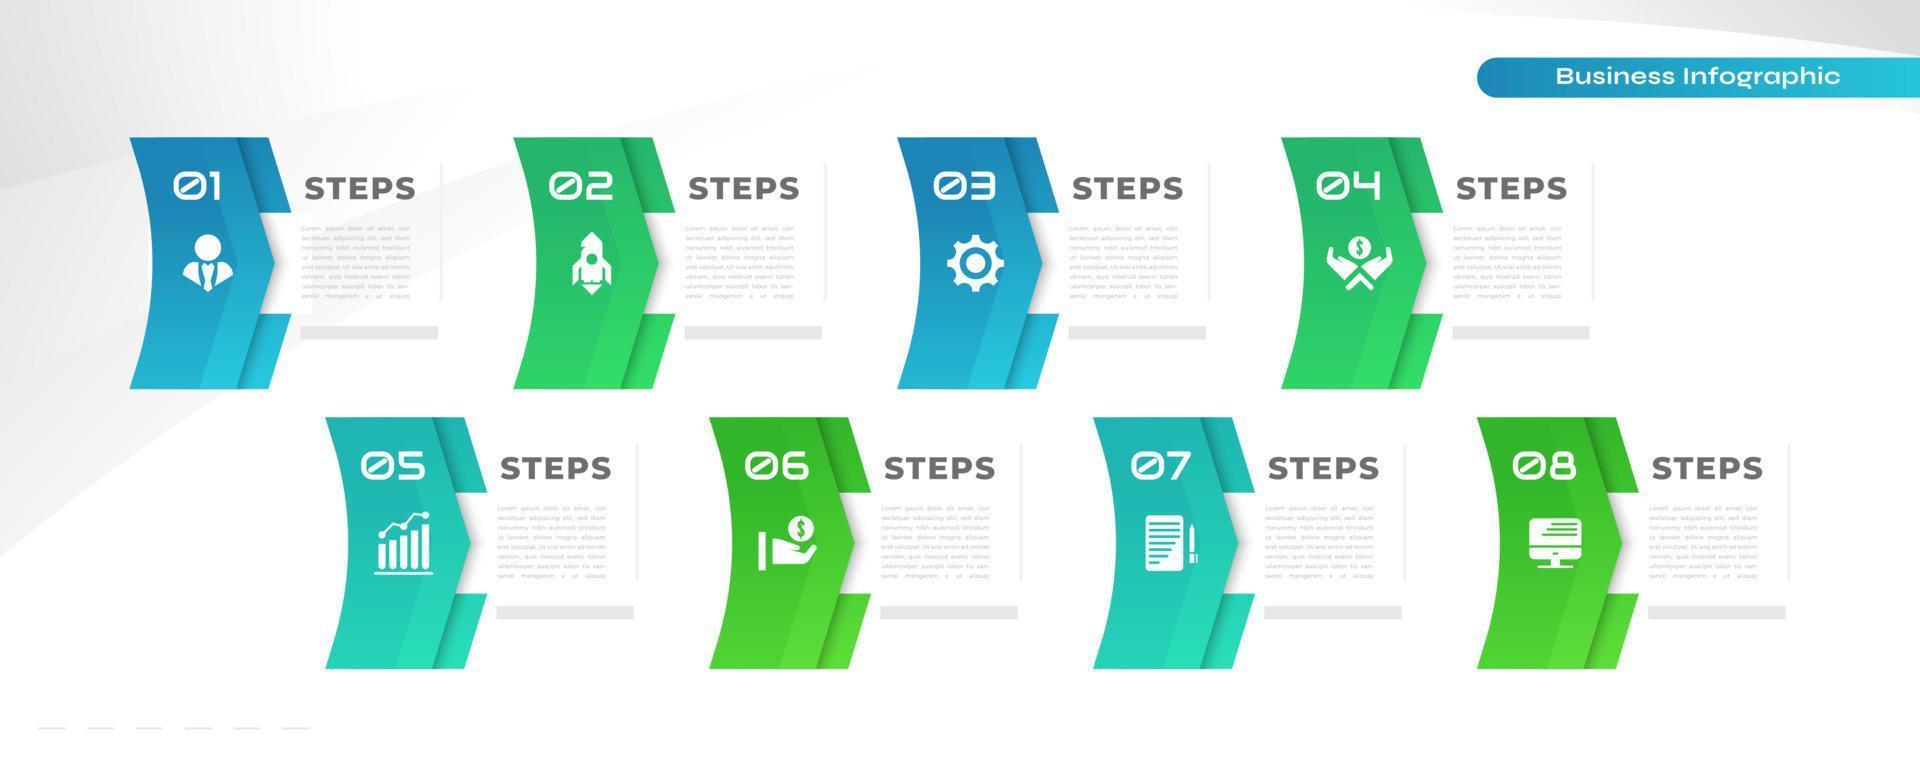 Business Infographic Design Template with 8 Options or Steps. Can be used for Presentation, Workflow Layout, Diagram, or Annual Report vector